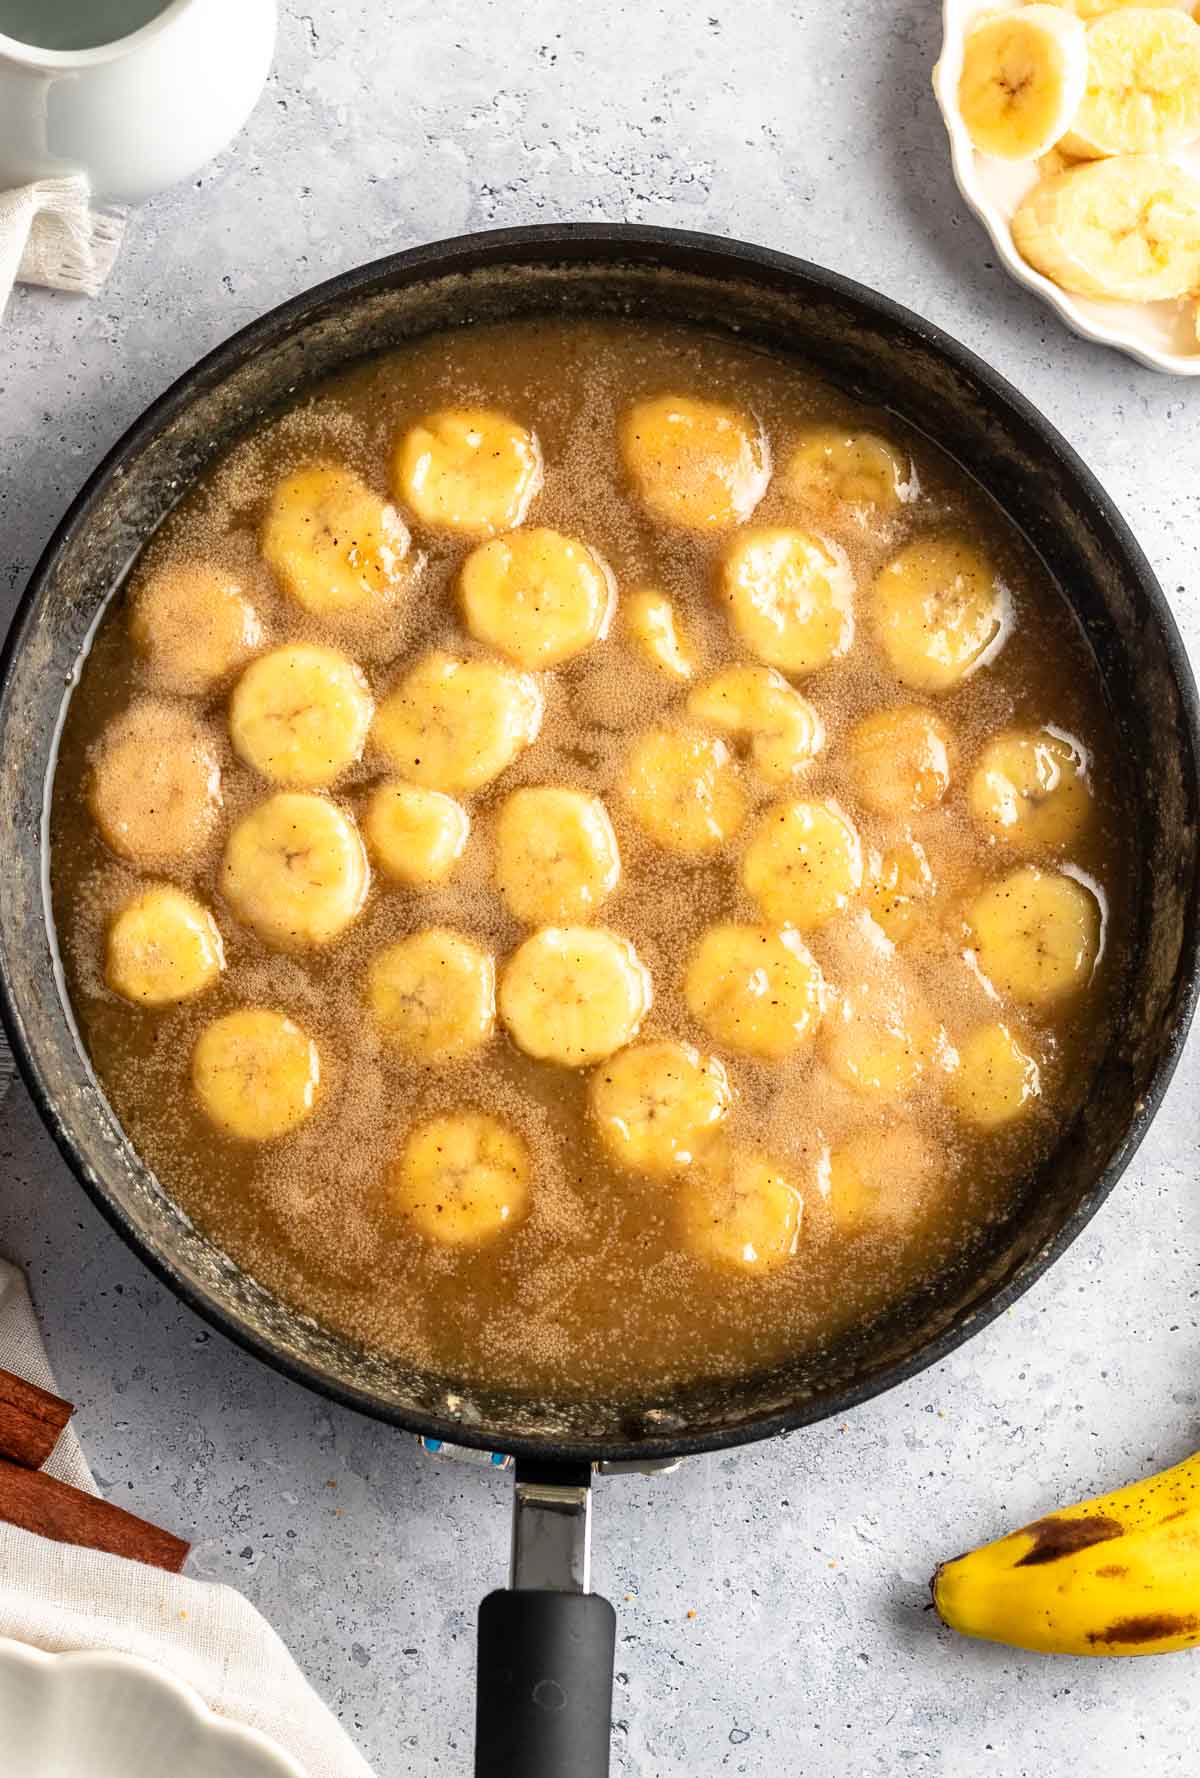 Top of bananas foster topping in a pan.